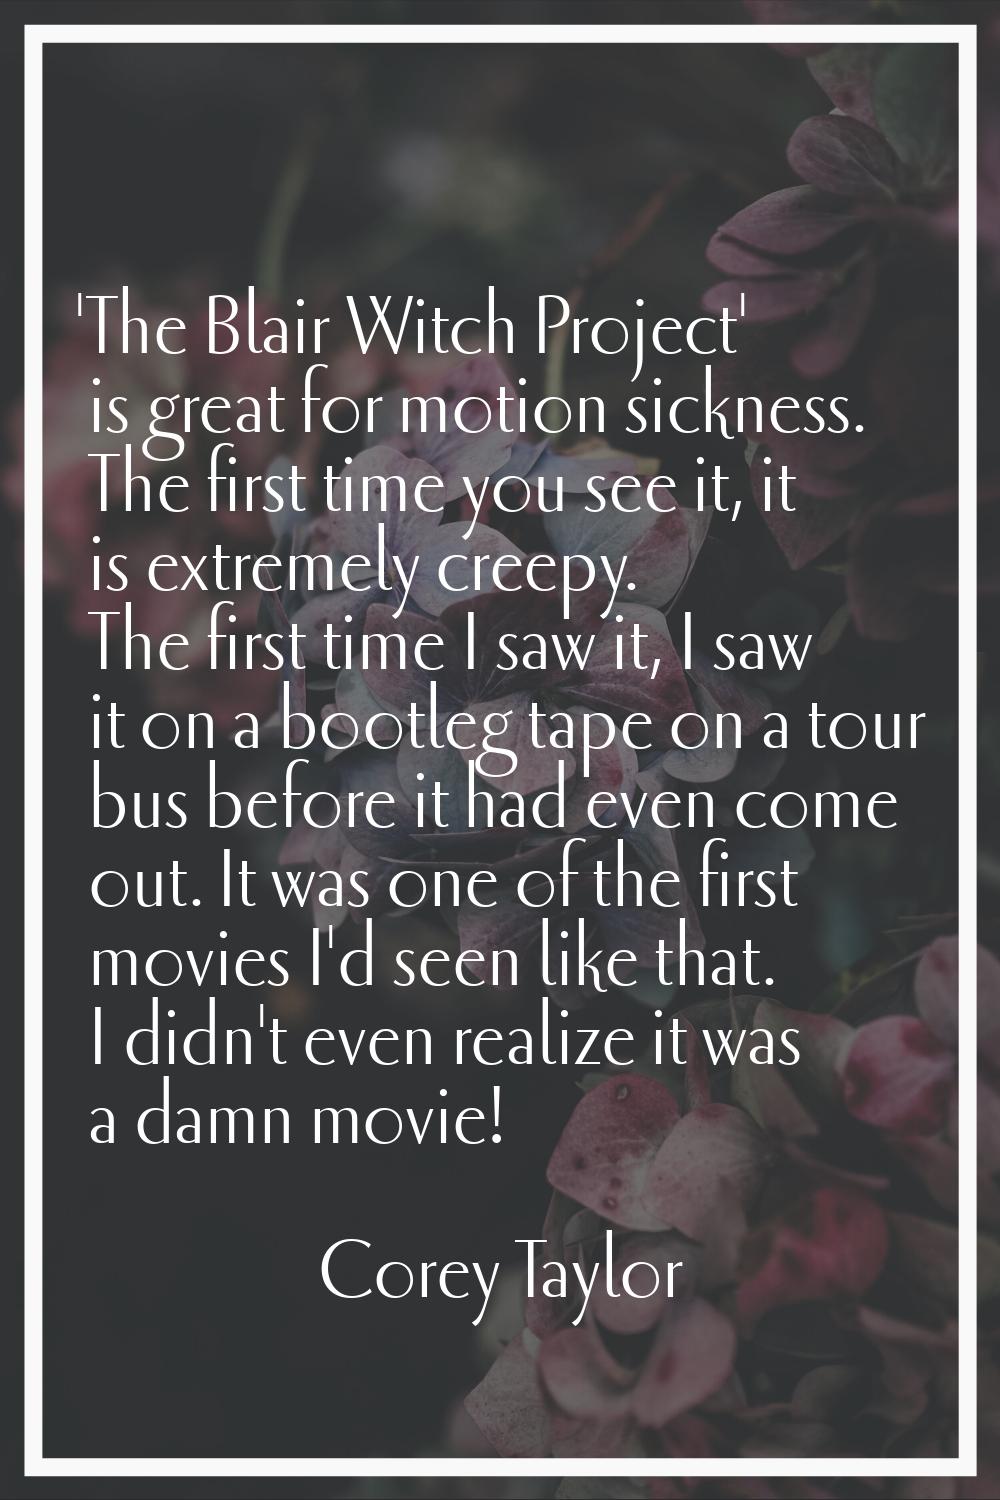 'The Blair Witch Project' is great for motion sickness. The first time you see it, it is extremely 